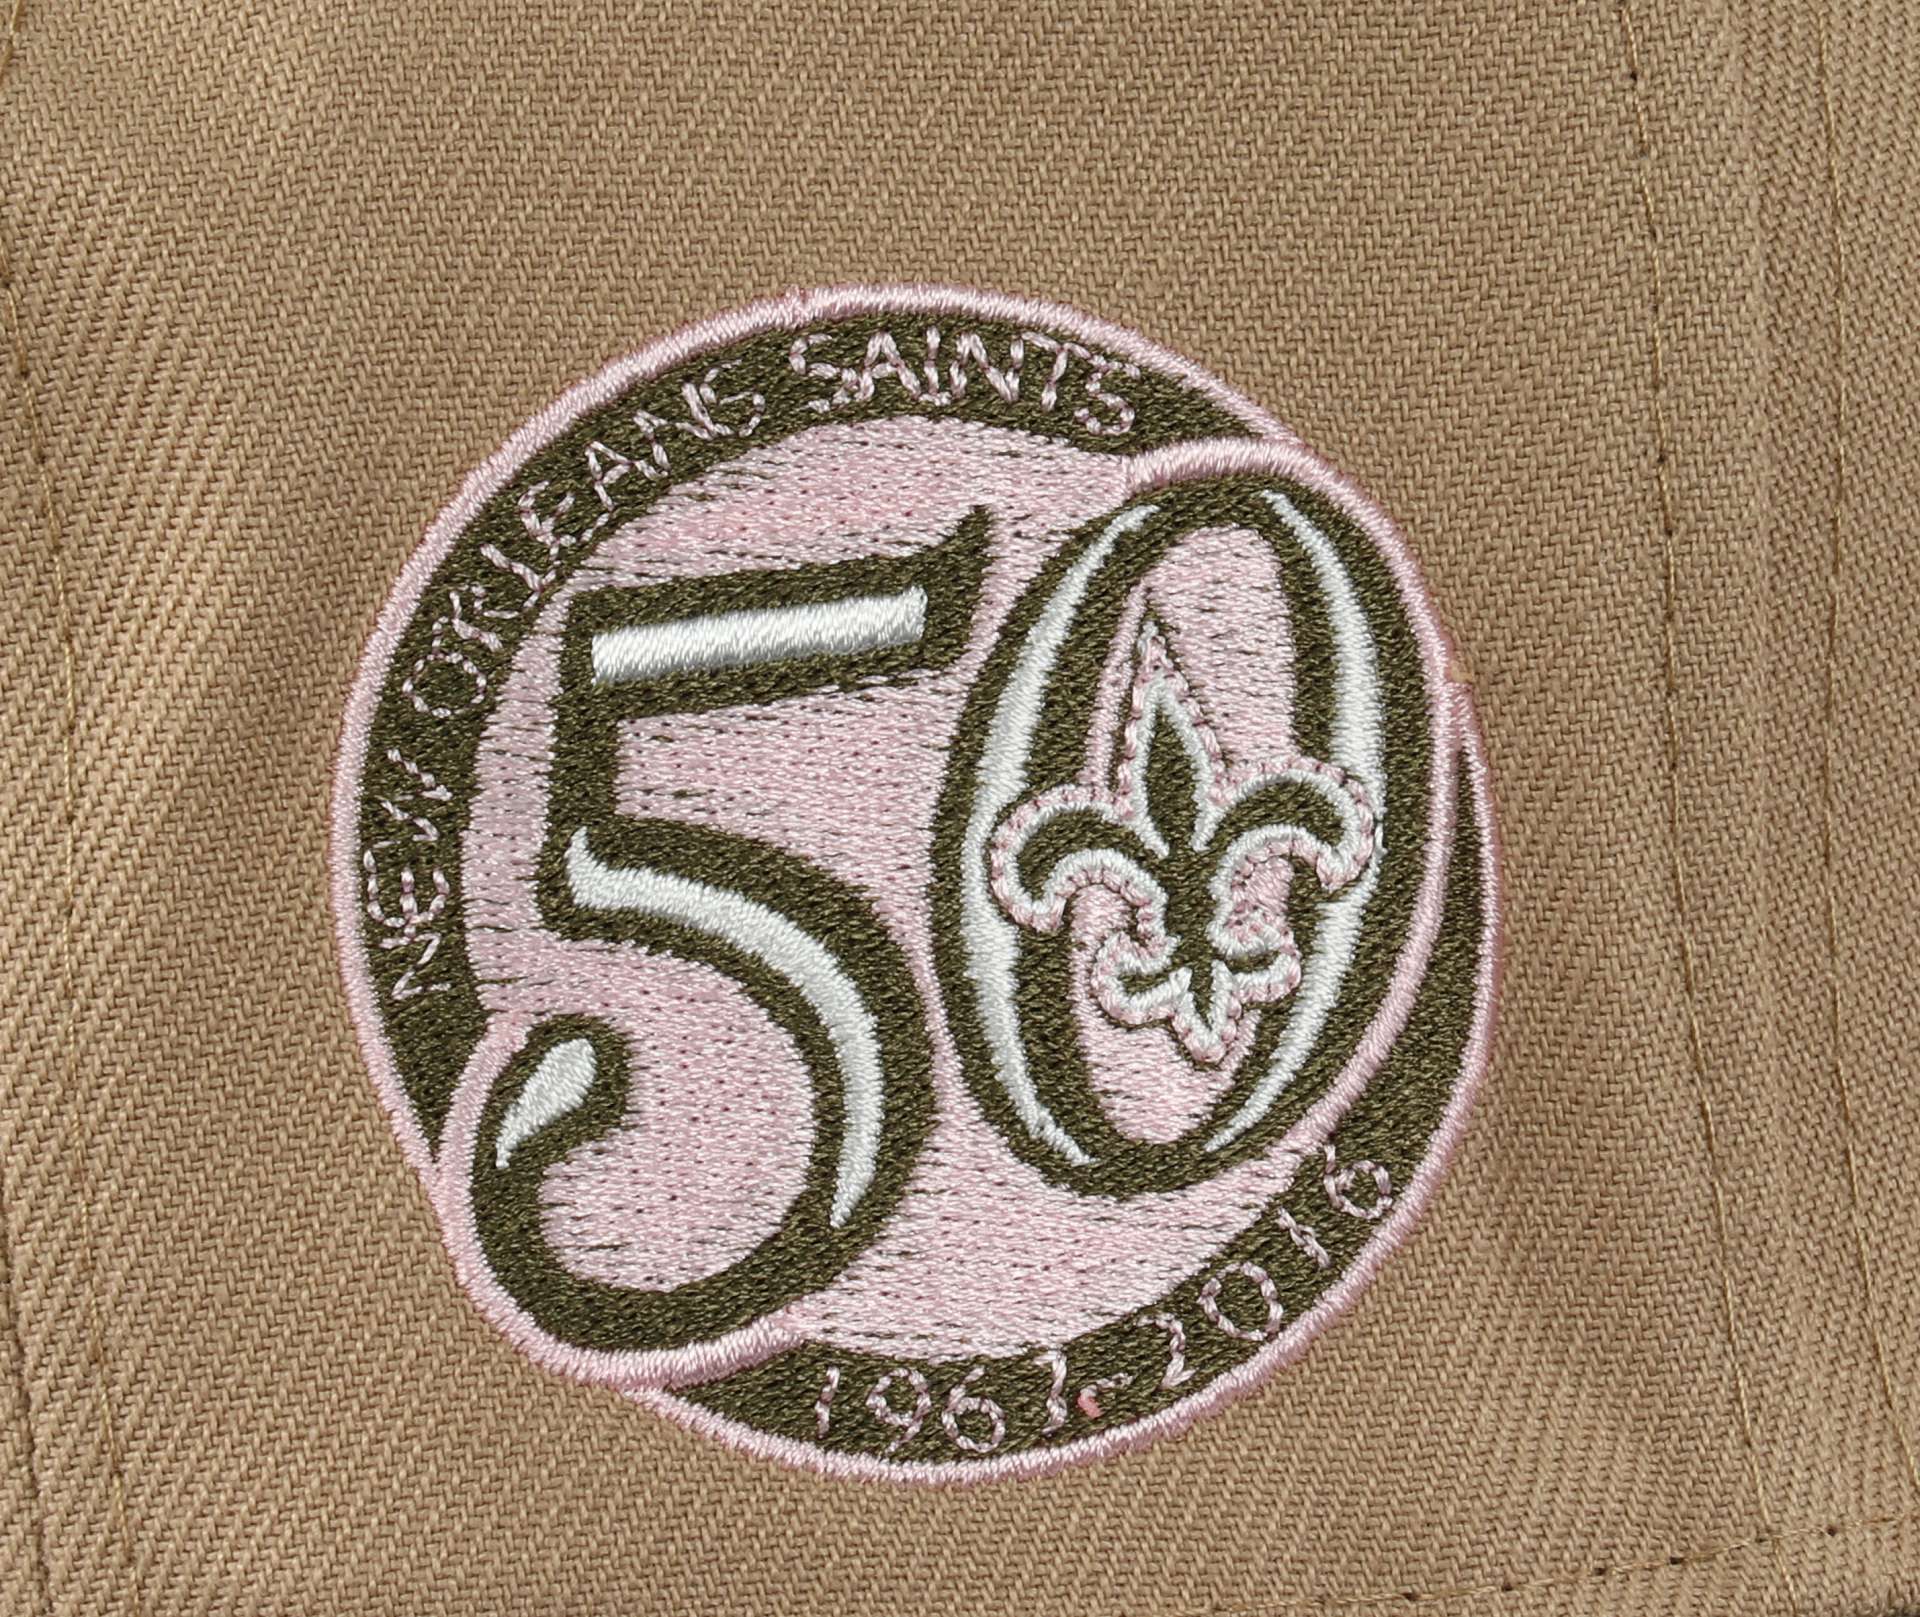 New Orleans Saints NFL 50th Anniversary Sidepatch Camel Olive 59Fifty Basecap New Era